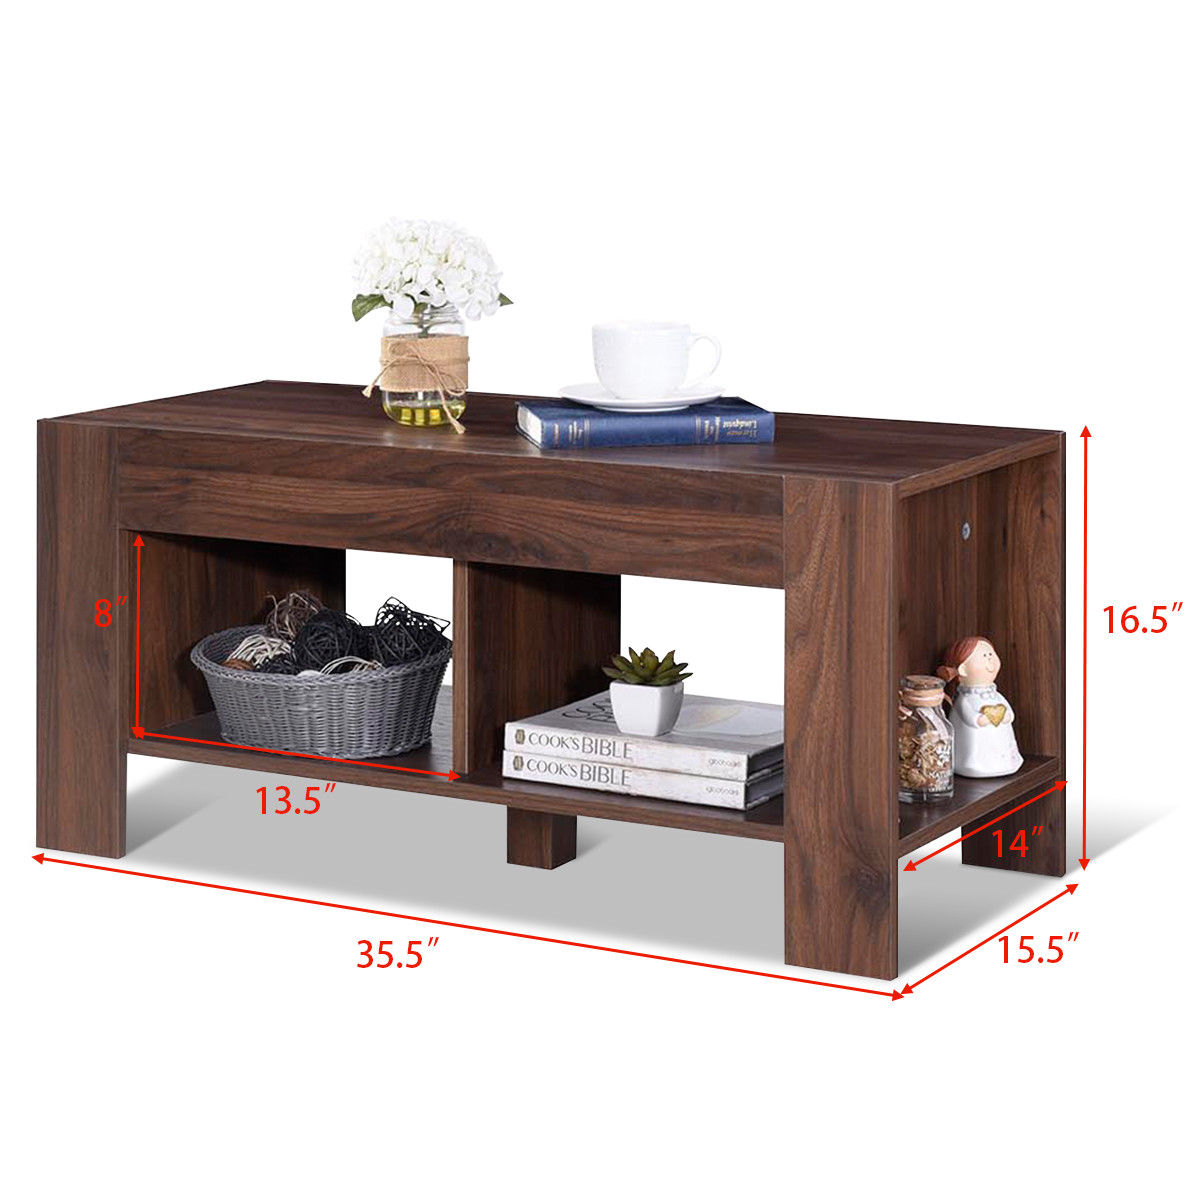 Gymax Minimalist Style Tea Table With Open Storage Spaces Walnut Wood Grain Table